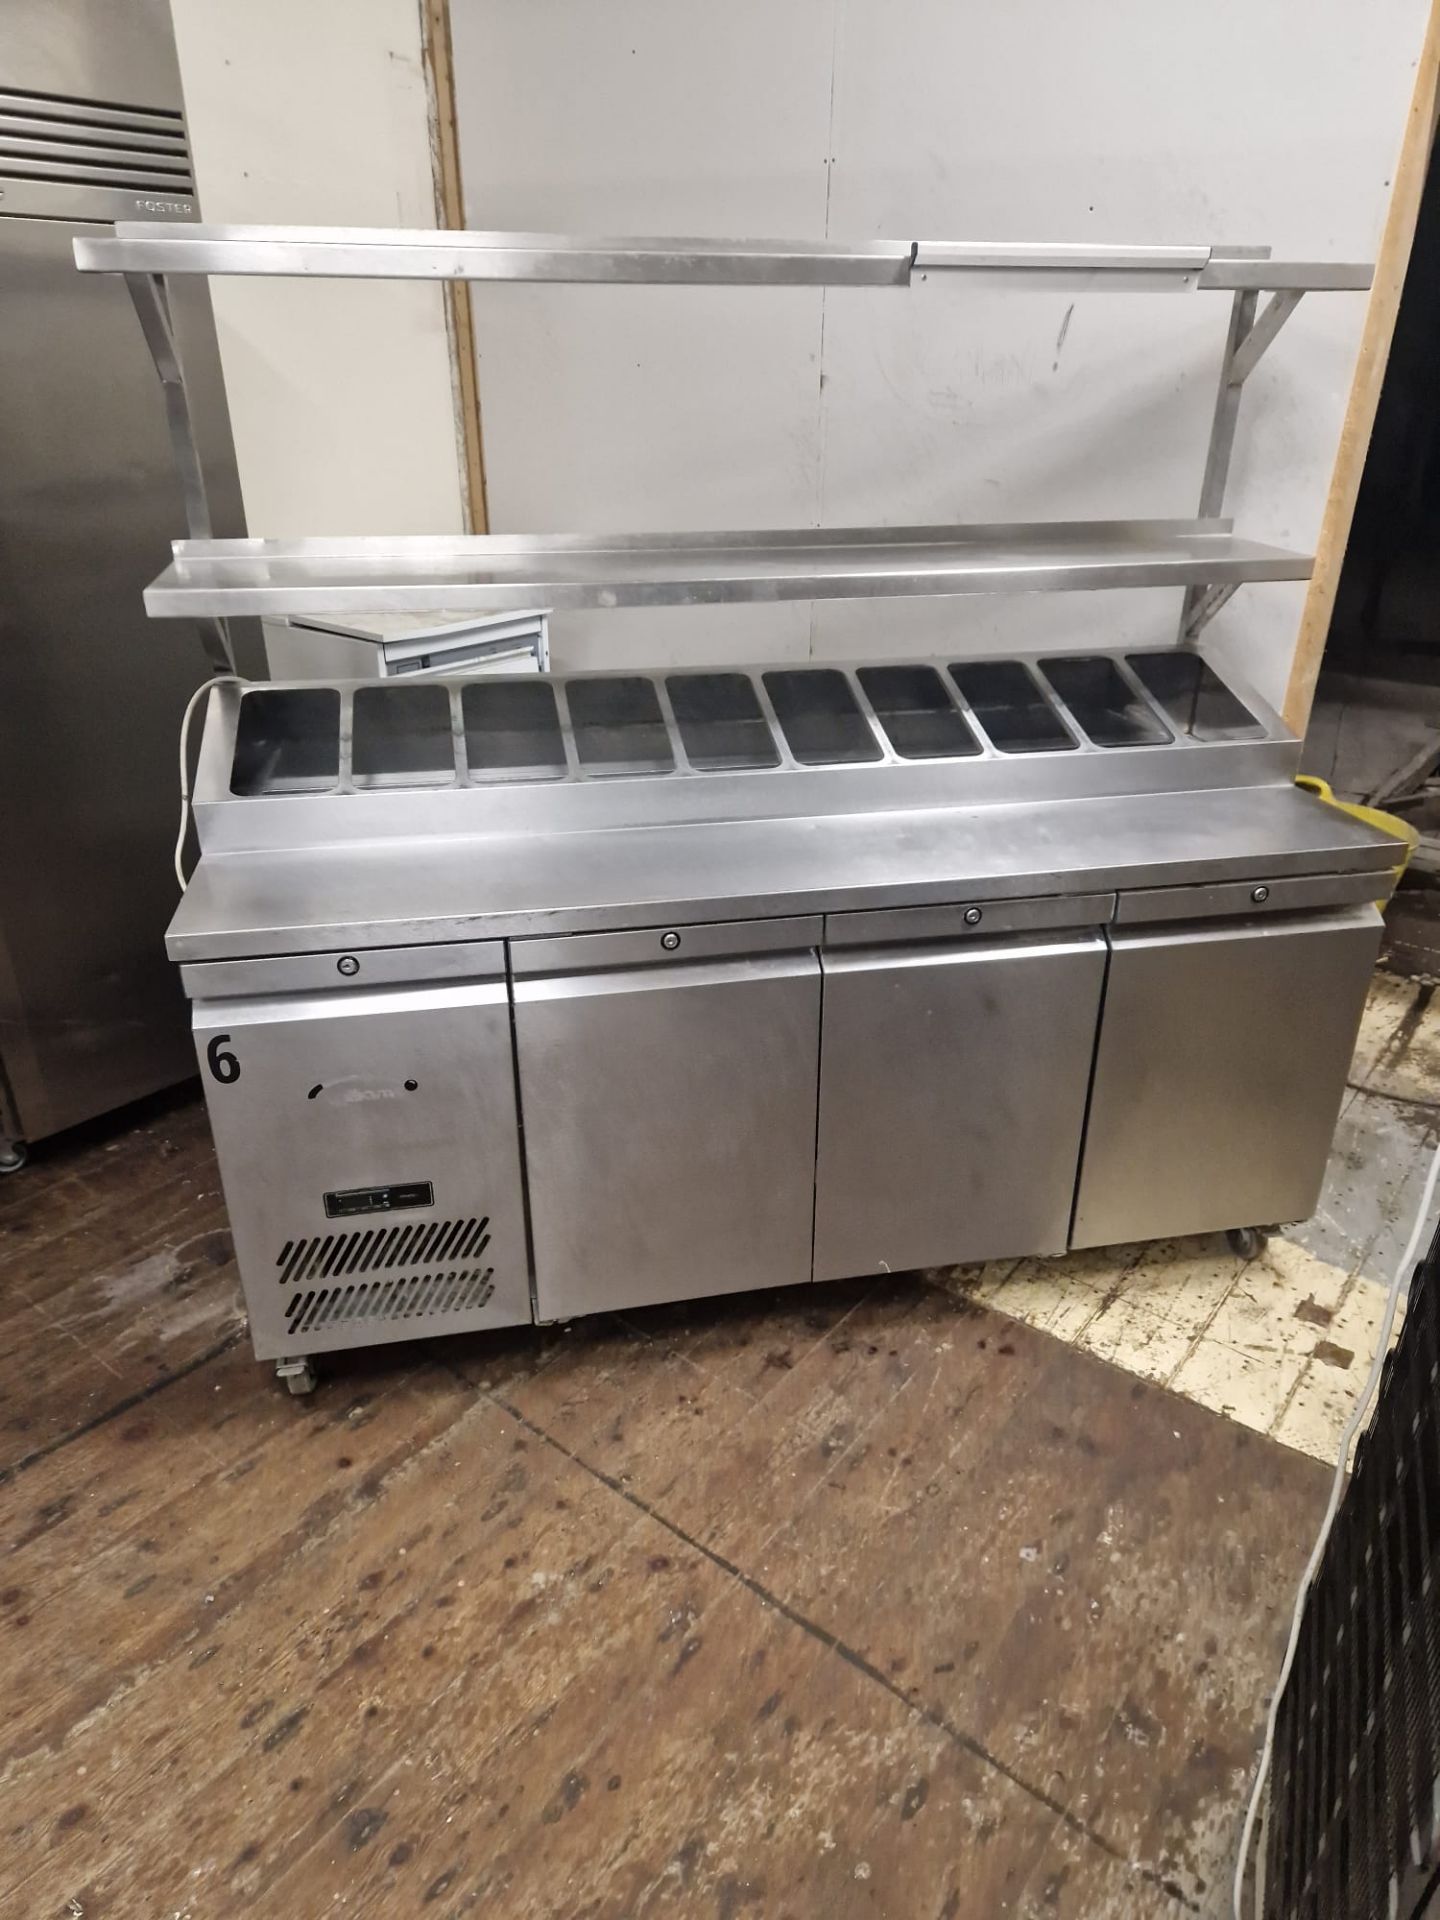 WILLIAMS 3 DOOR PIZZA PERP FRIDGE WITH SHELF -  SALAD BAR - FULLY WORKING AND SERVICED